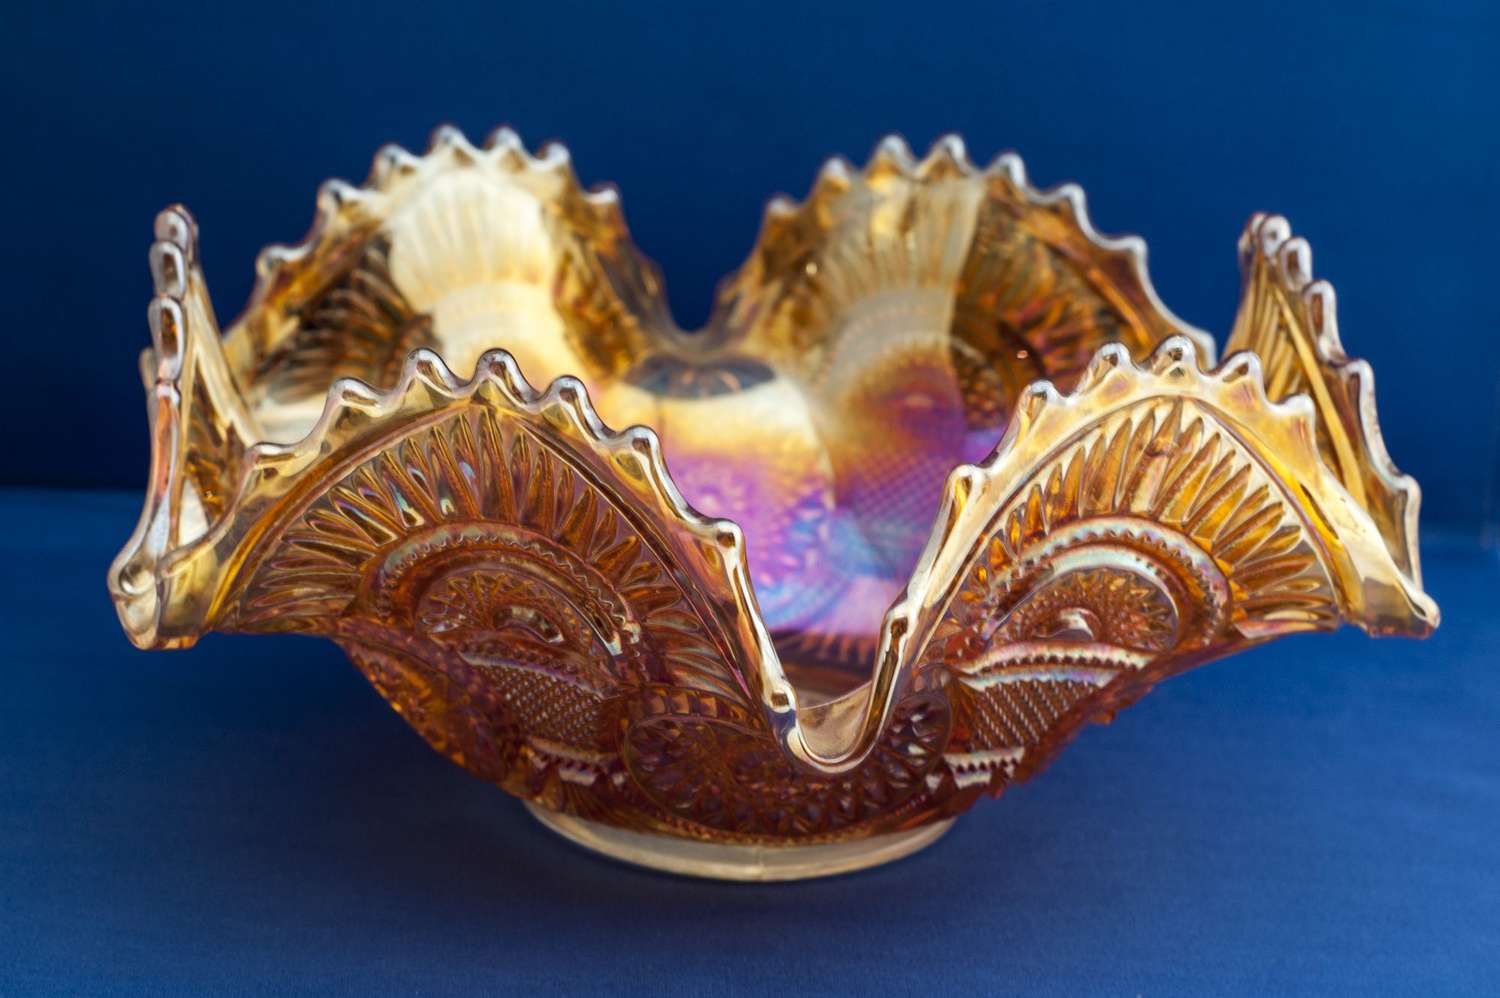 yellow carnival glass bowl on blue surfacce